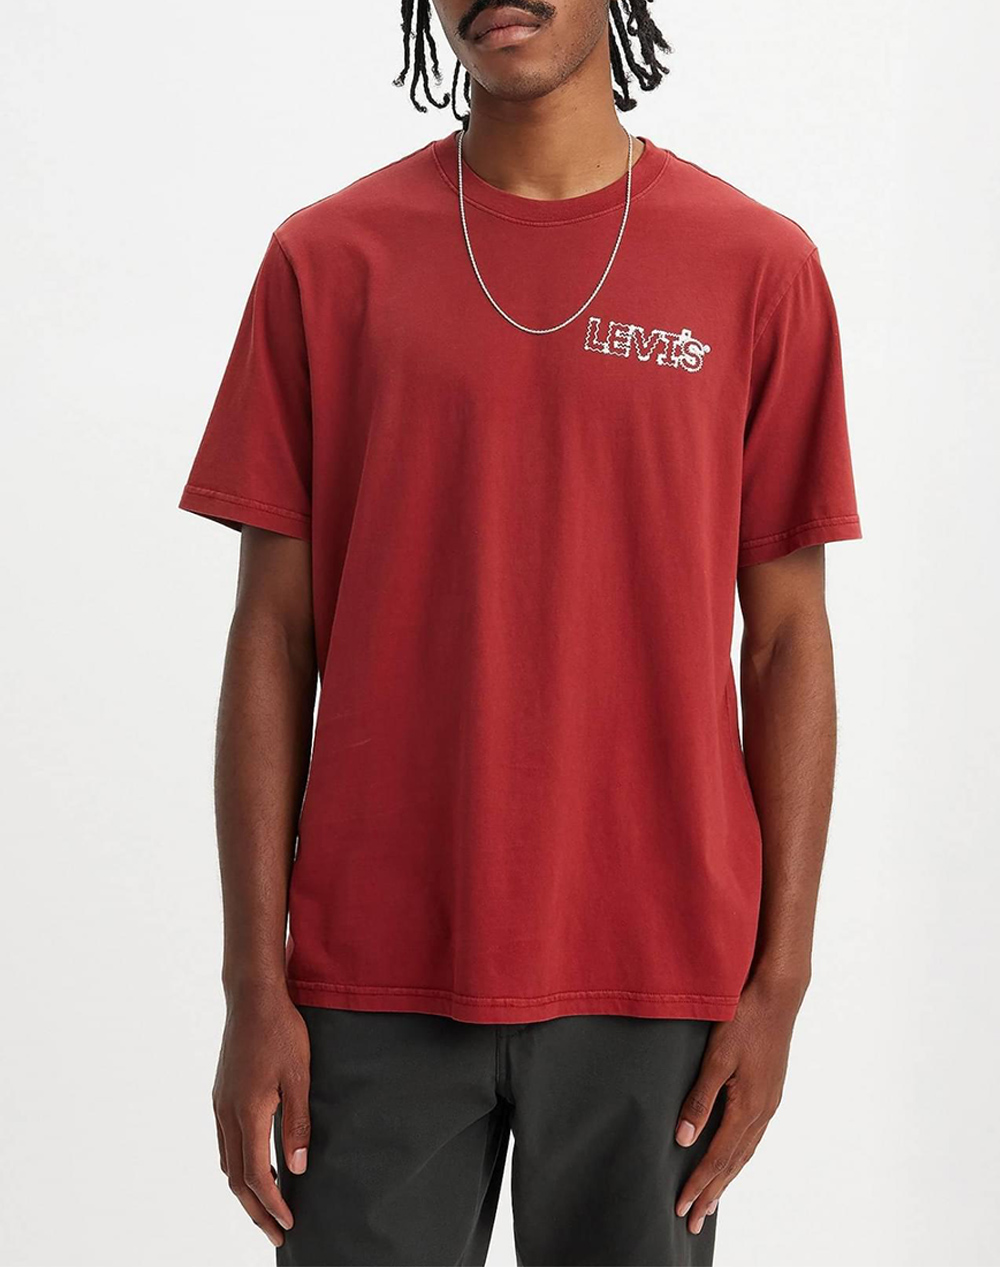 LEVIS RELAXED FIT TEE 16143-1301-1301 Red